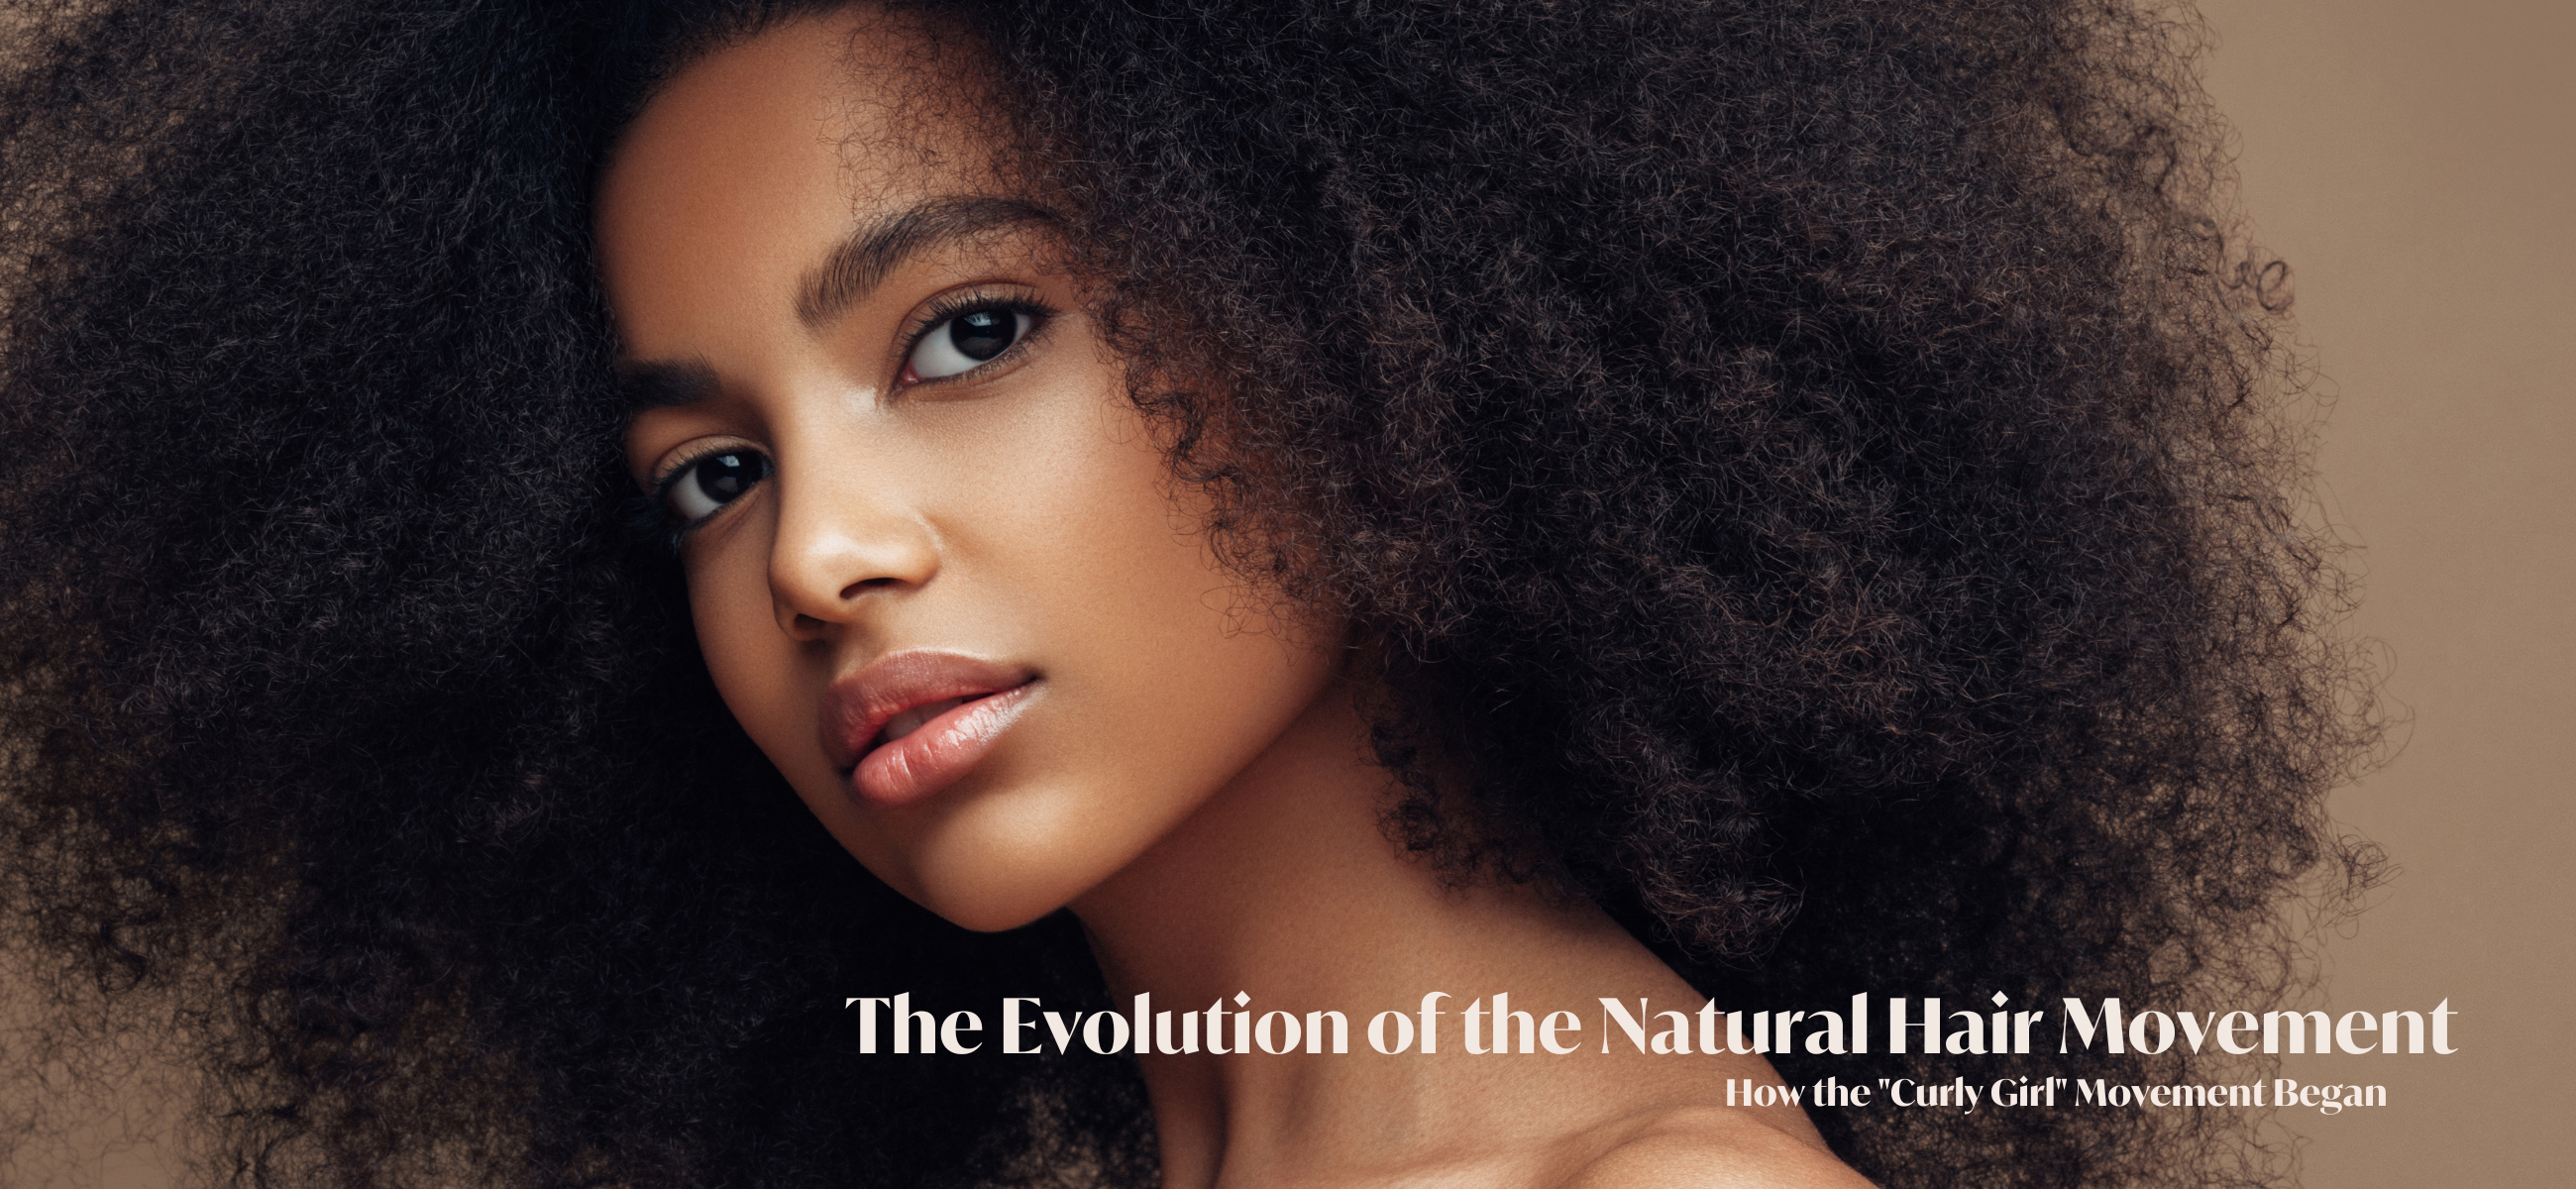 The Evolution of the Natural Hair Movement: How the "Curly Girl" Movement Began